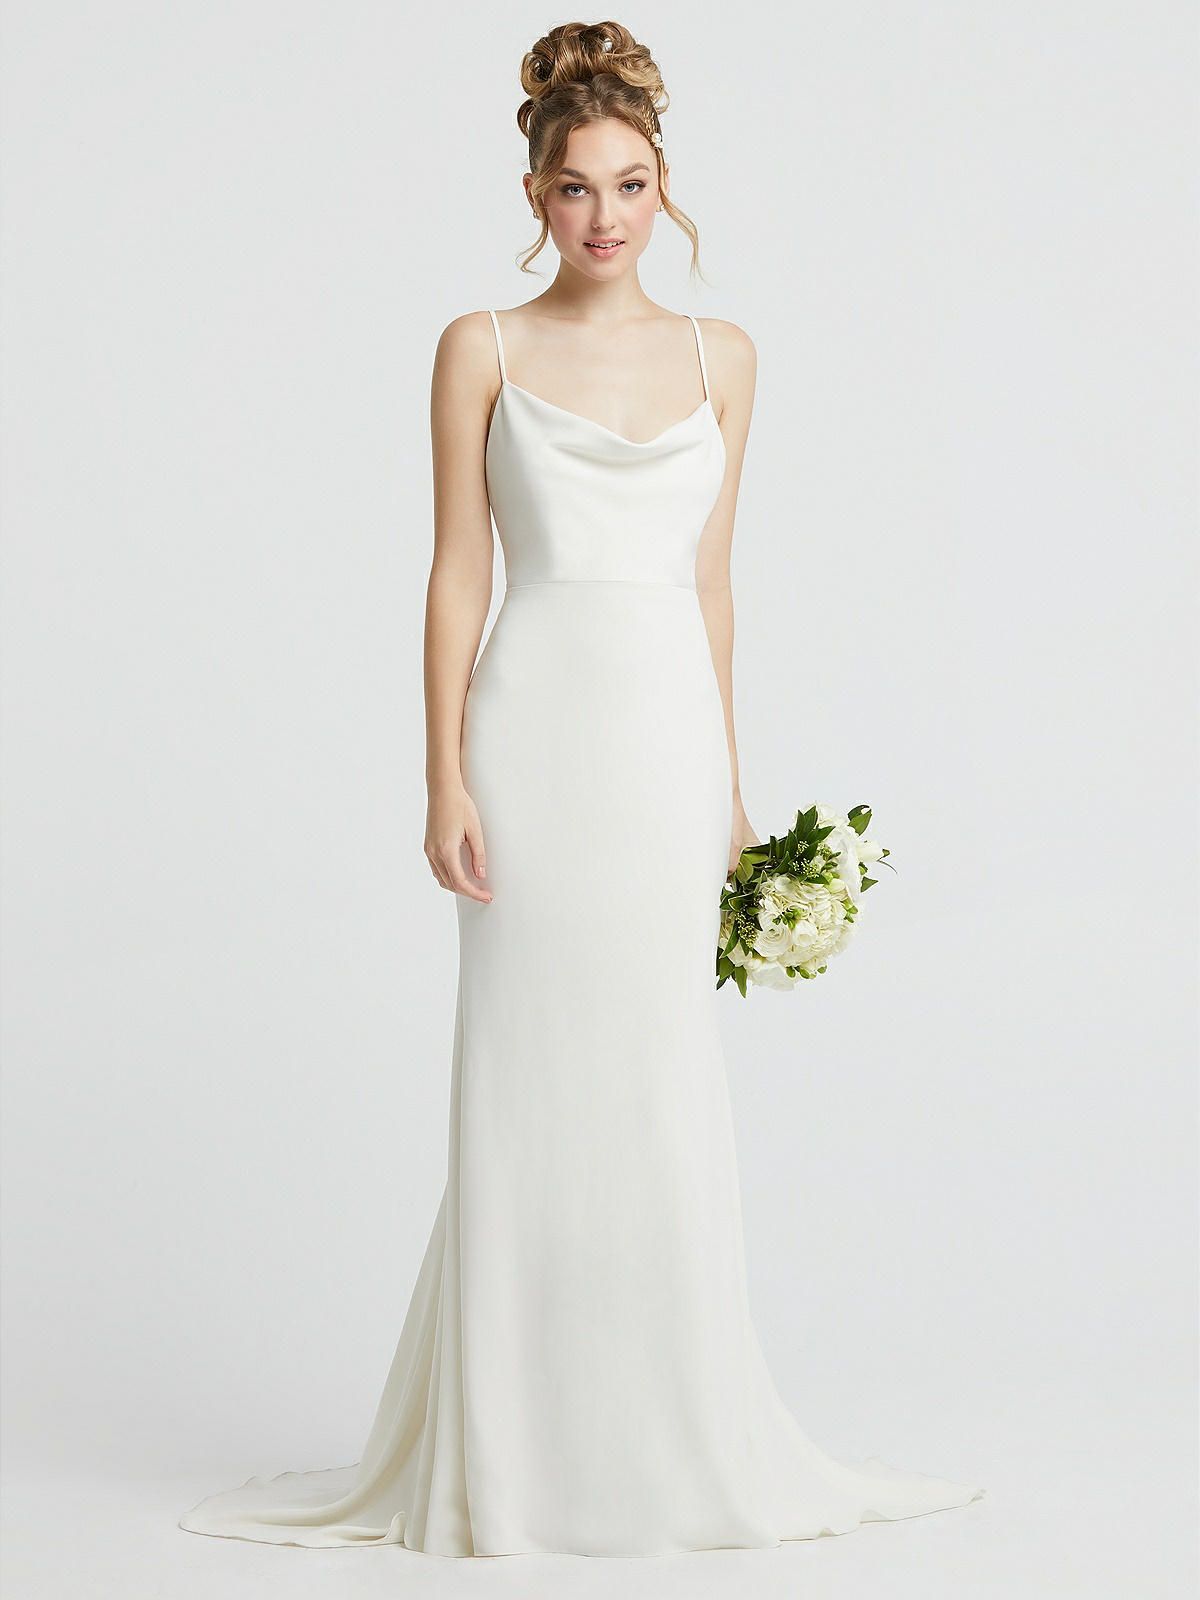 Cowl-Neck Convertible Strap Mermaid Wedding Dress | The Dessy Group